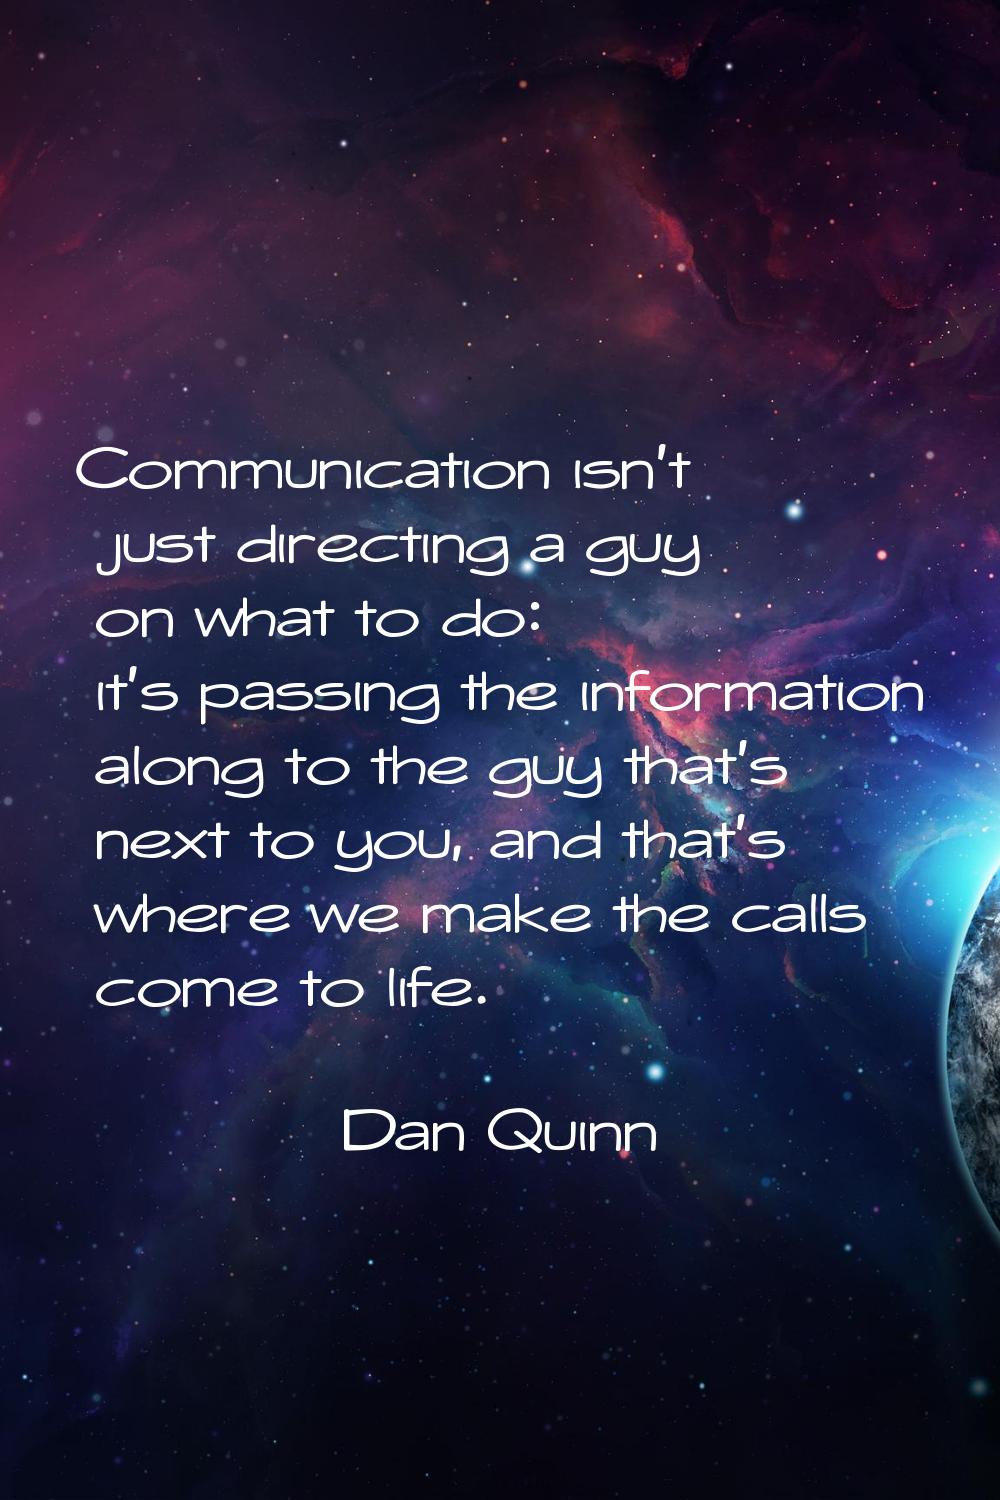 Communication isn't just directing a guy on what to do: it's passing the information along to the g